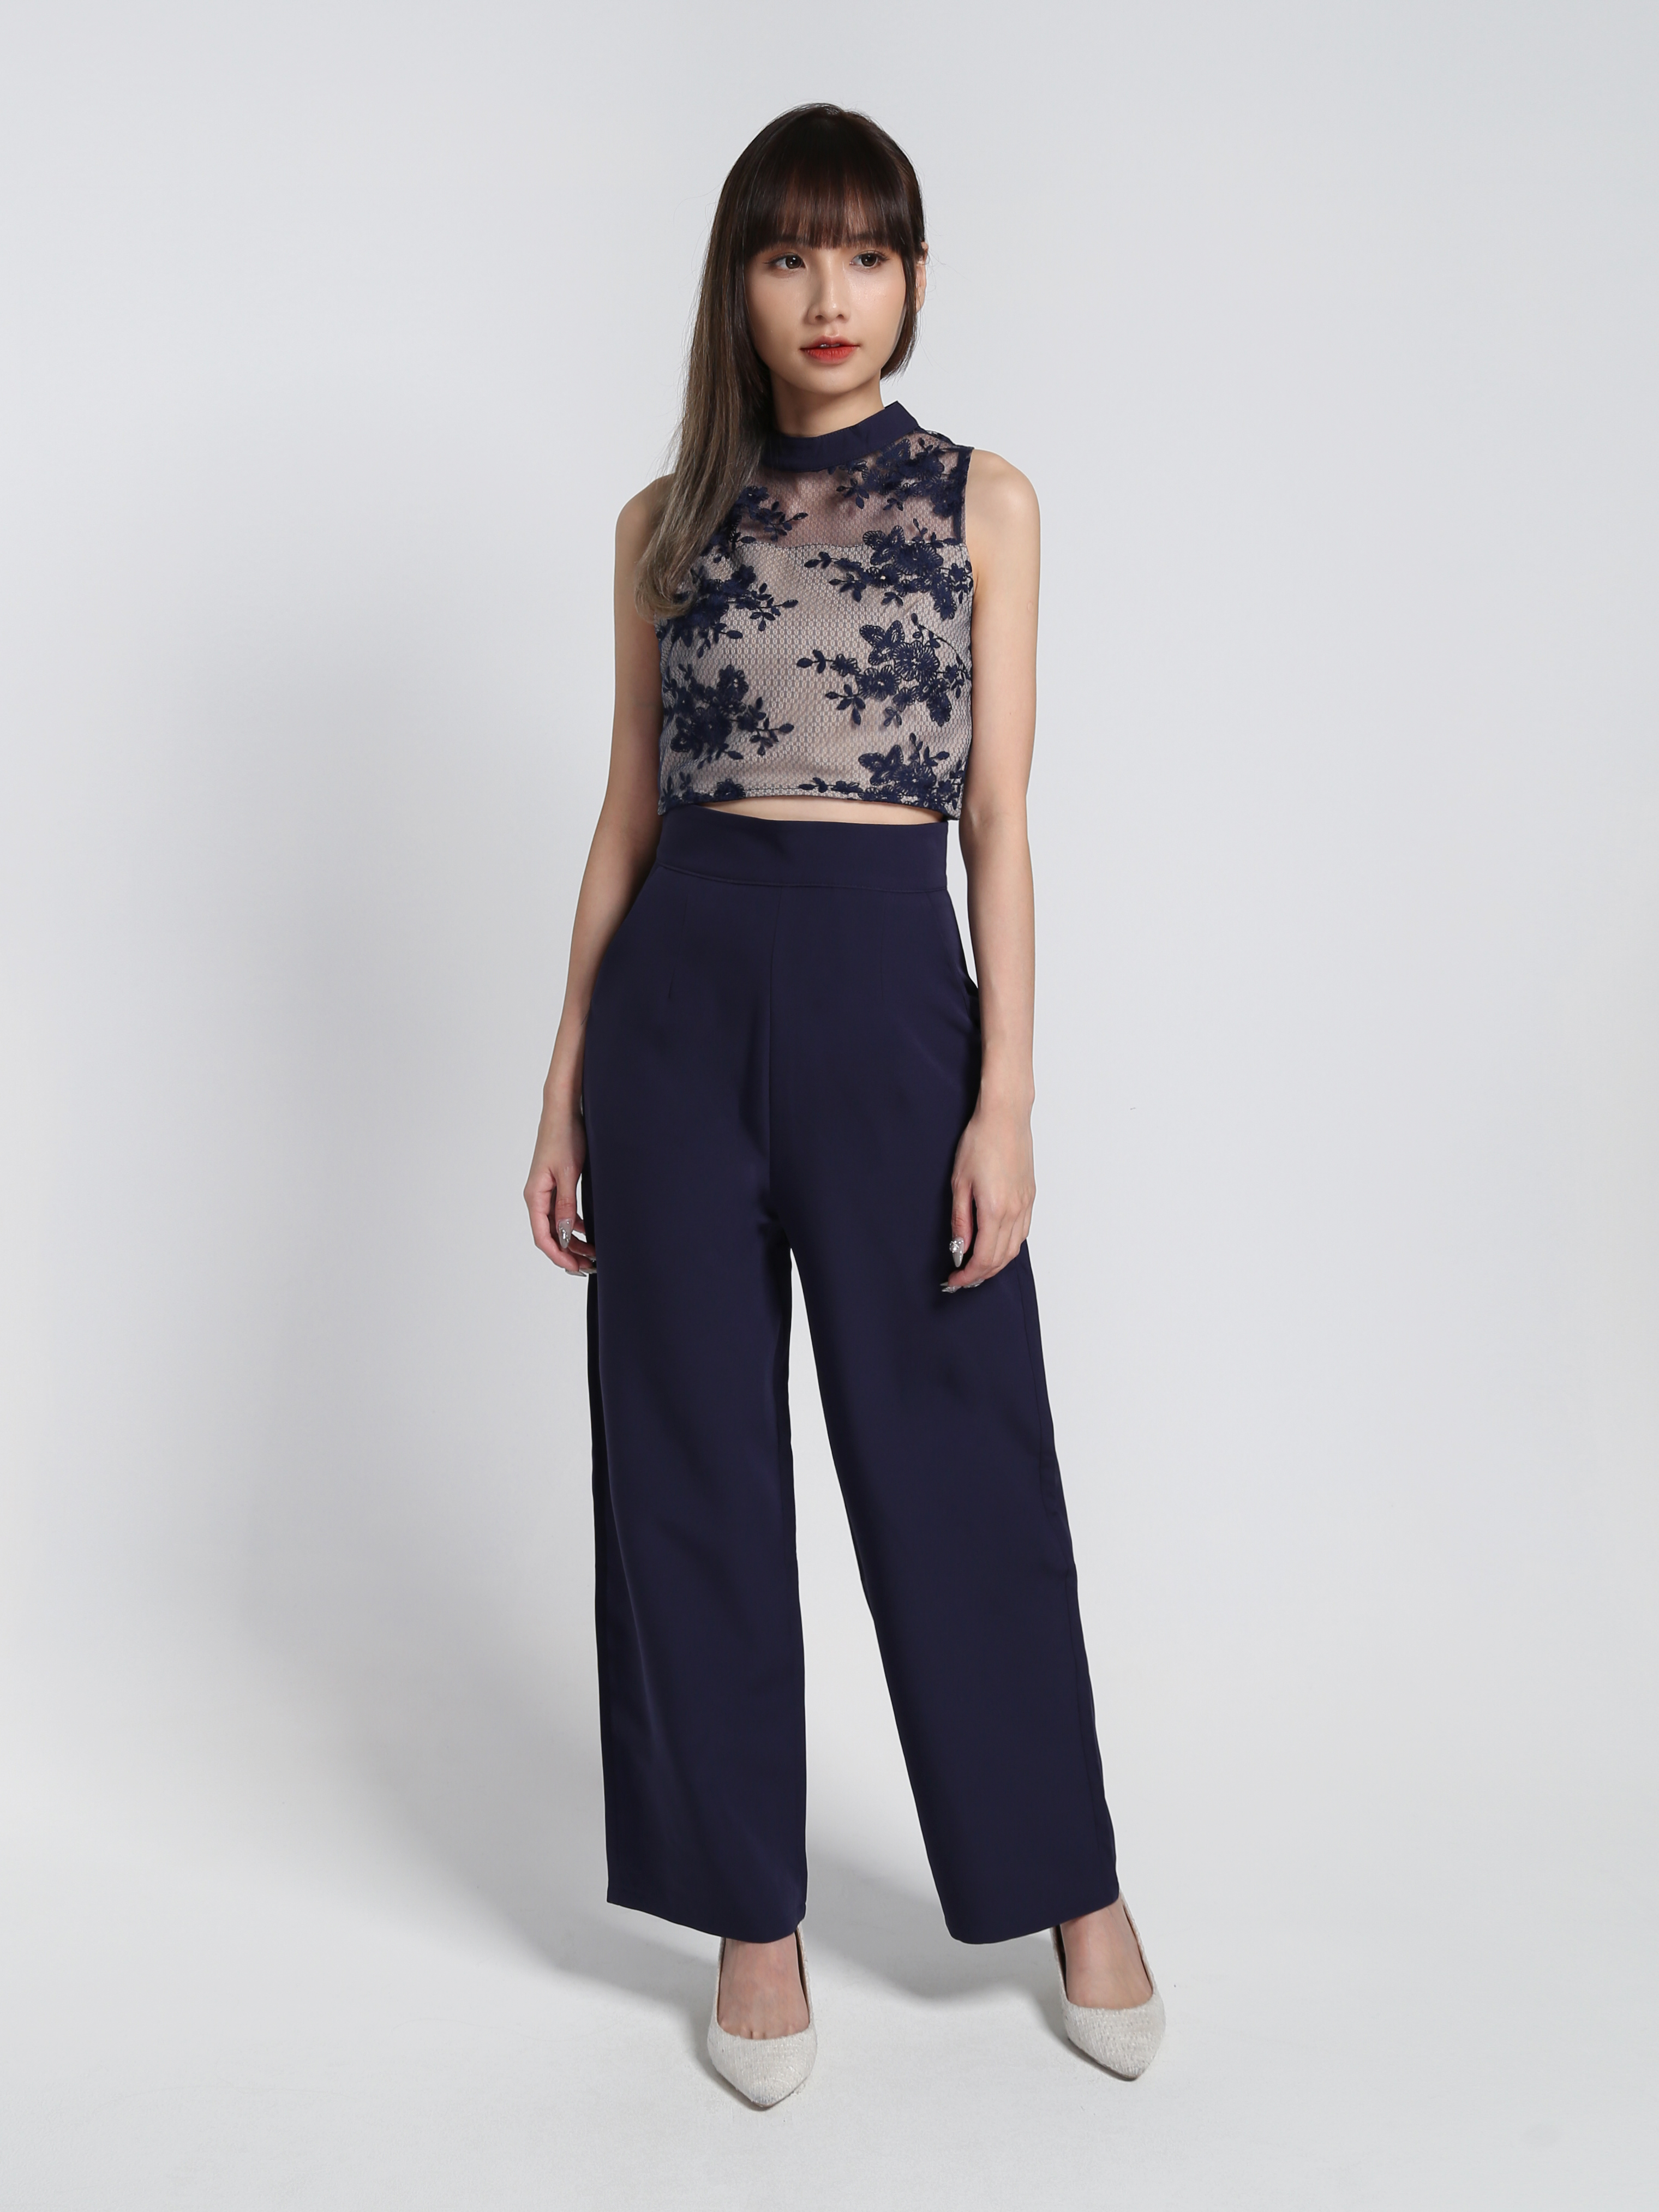 Sleeveless Floral Top With Long Pants Set 27627